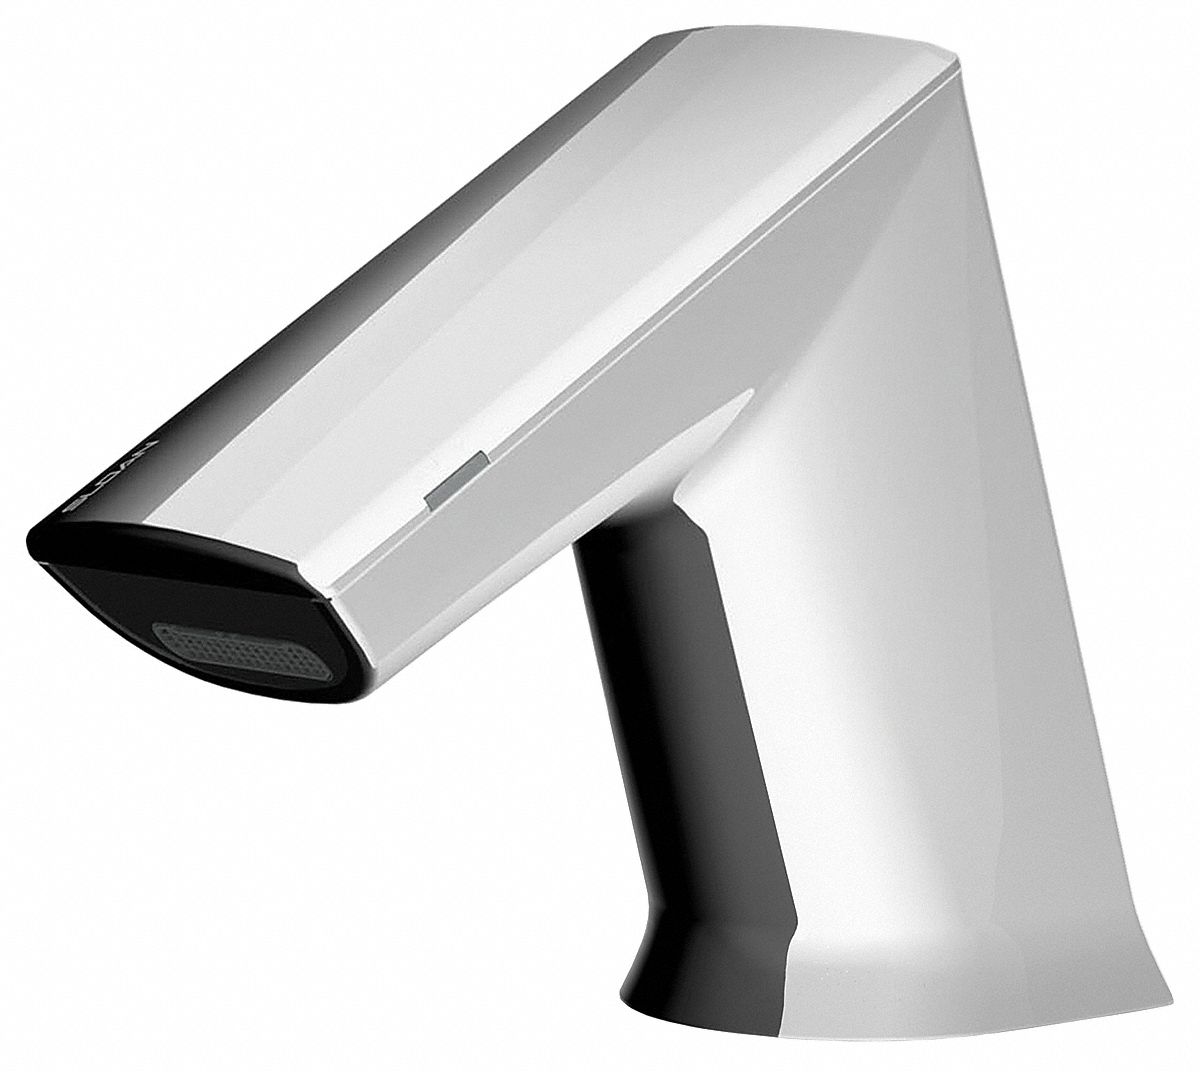 Sloan Angled Straight Bathroom Sink Faucet None Faucet Handle